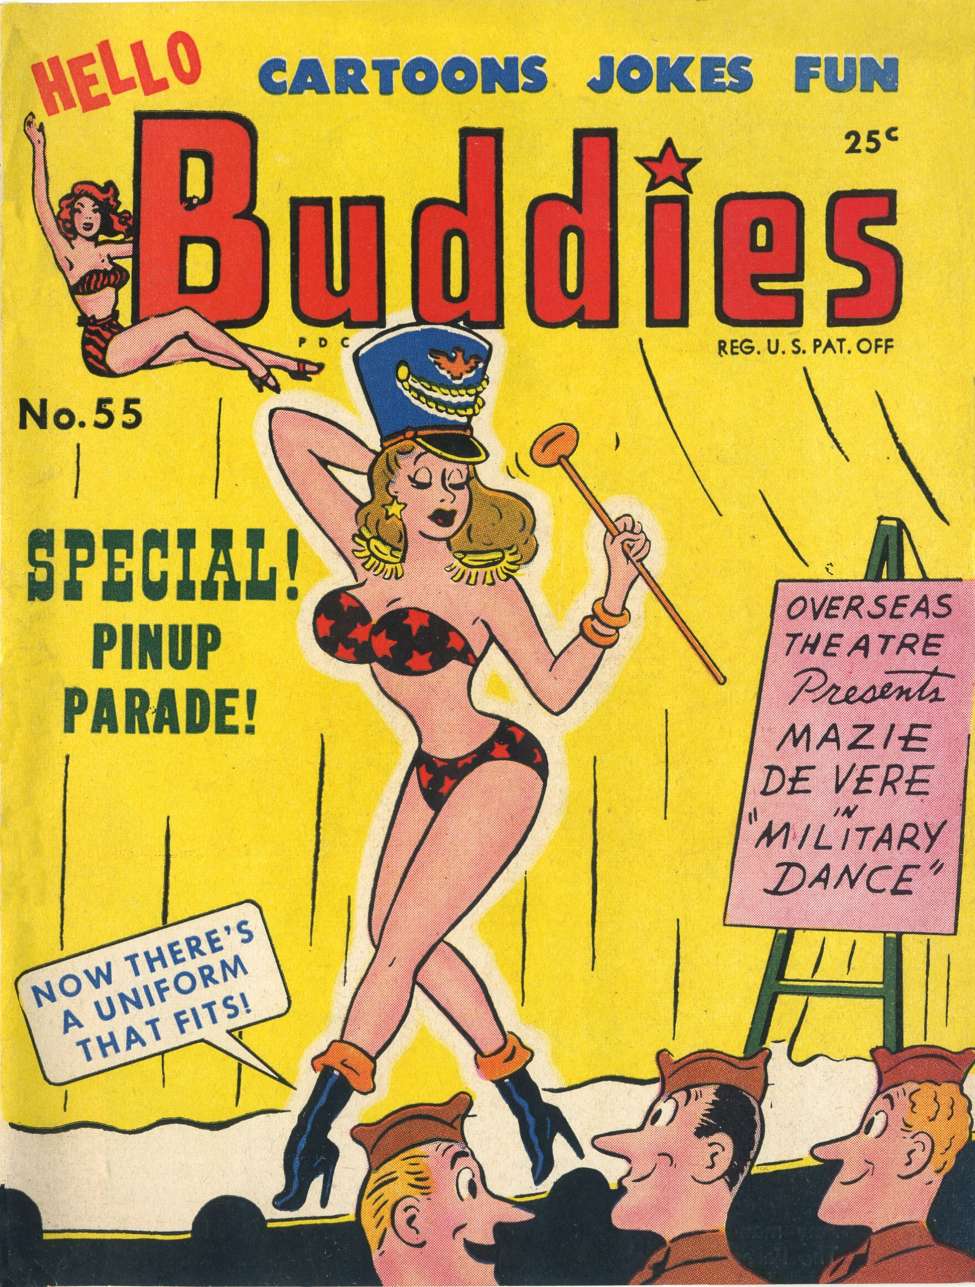 Book Cover For Hello Buddies 55